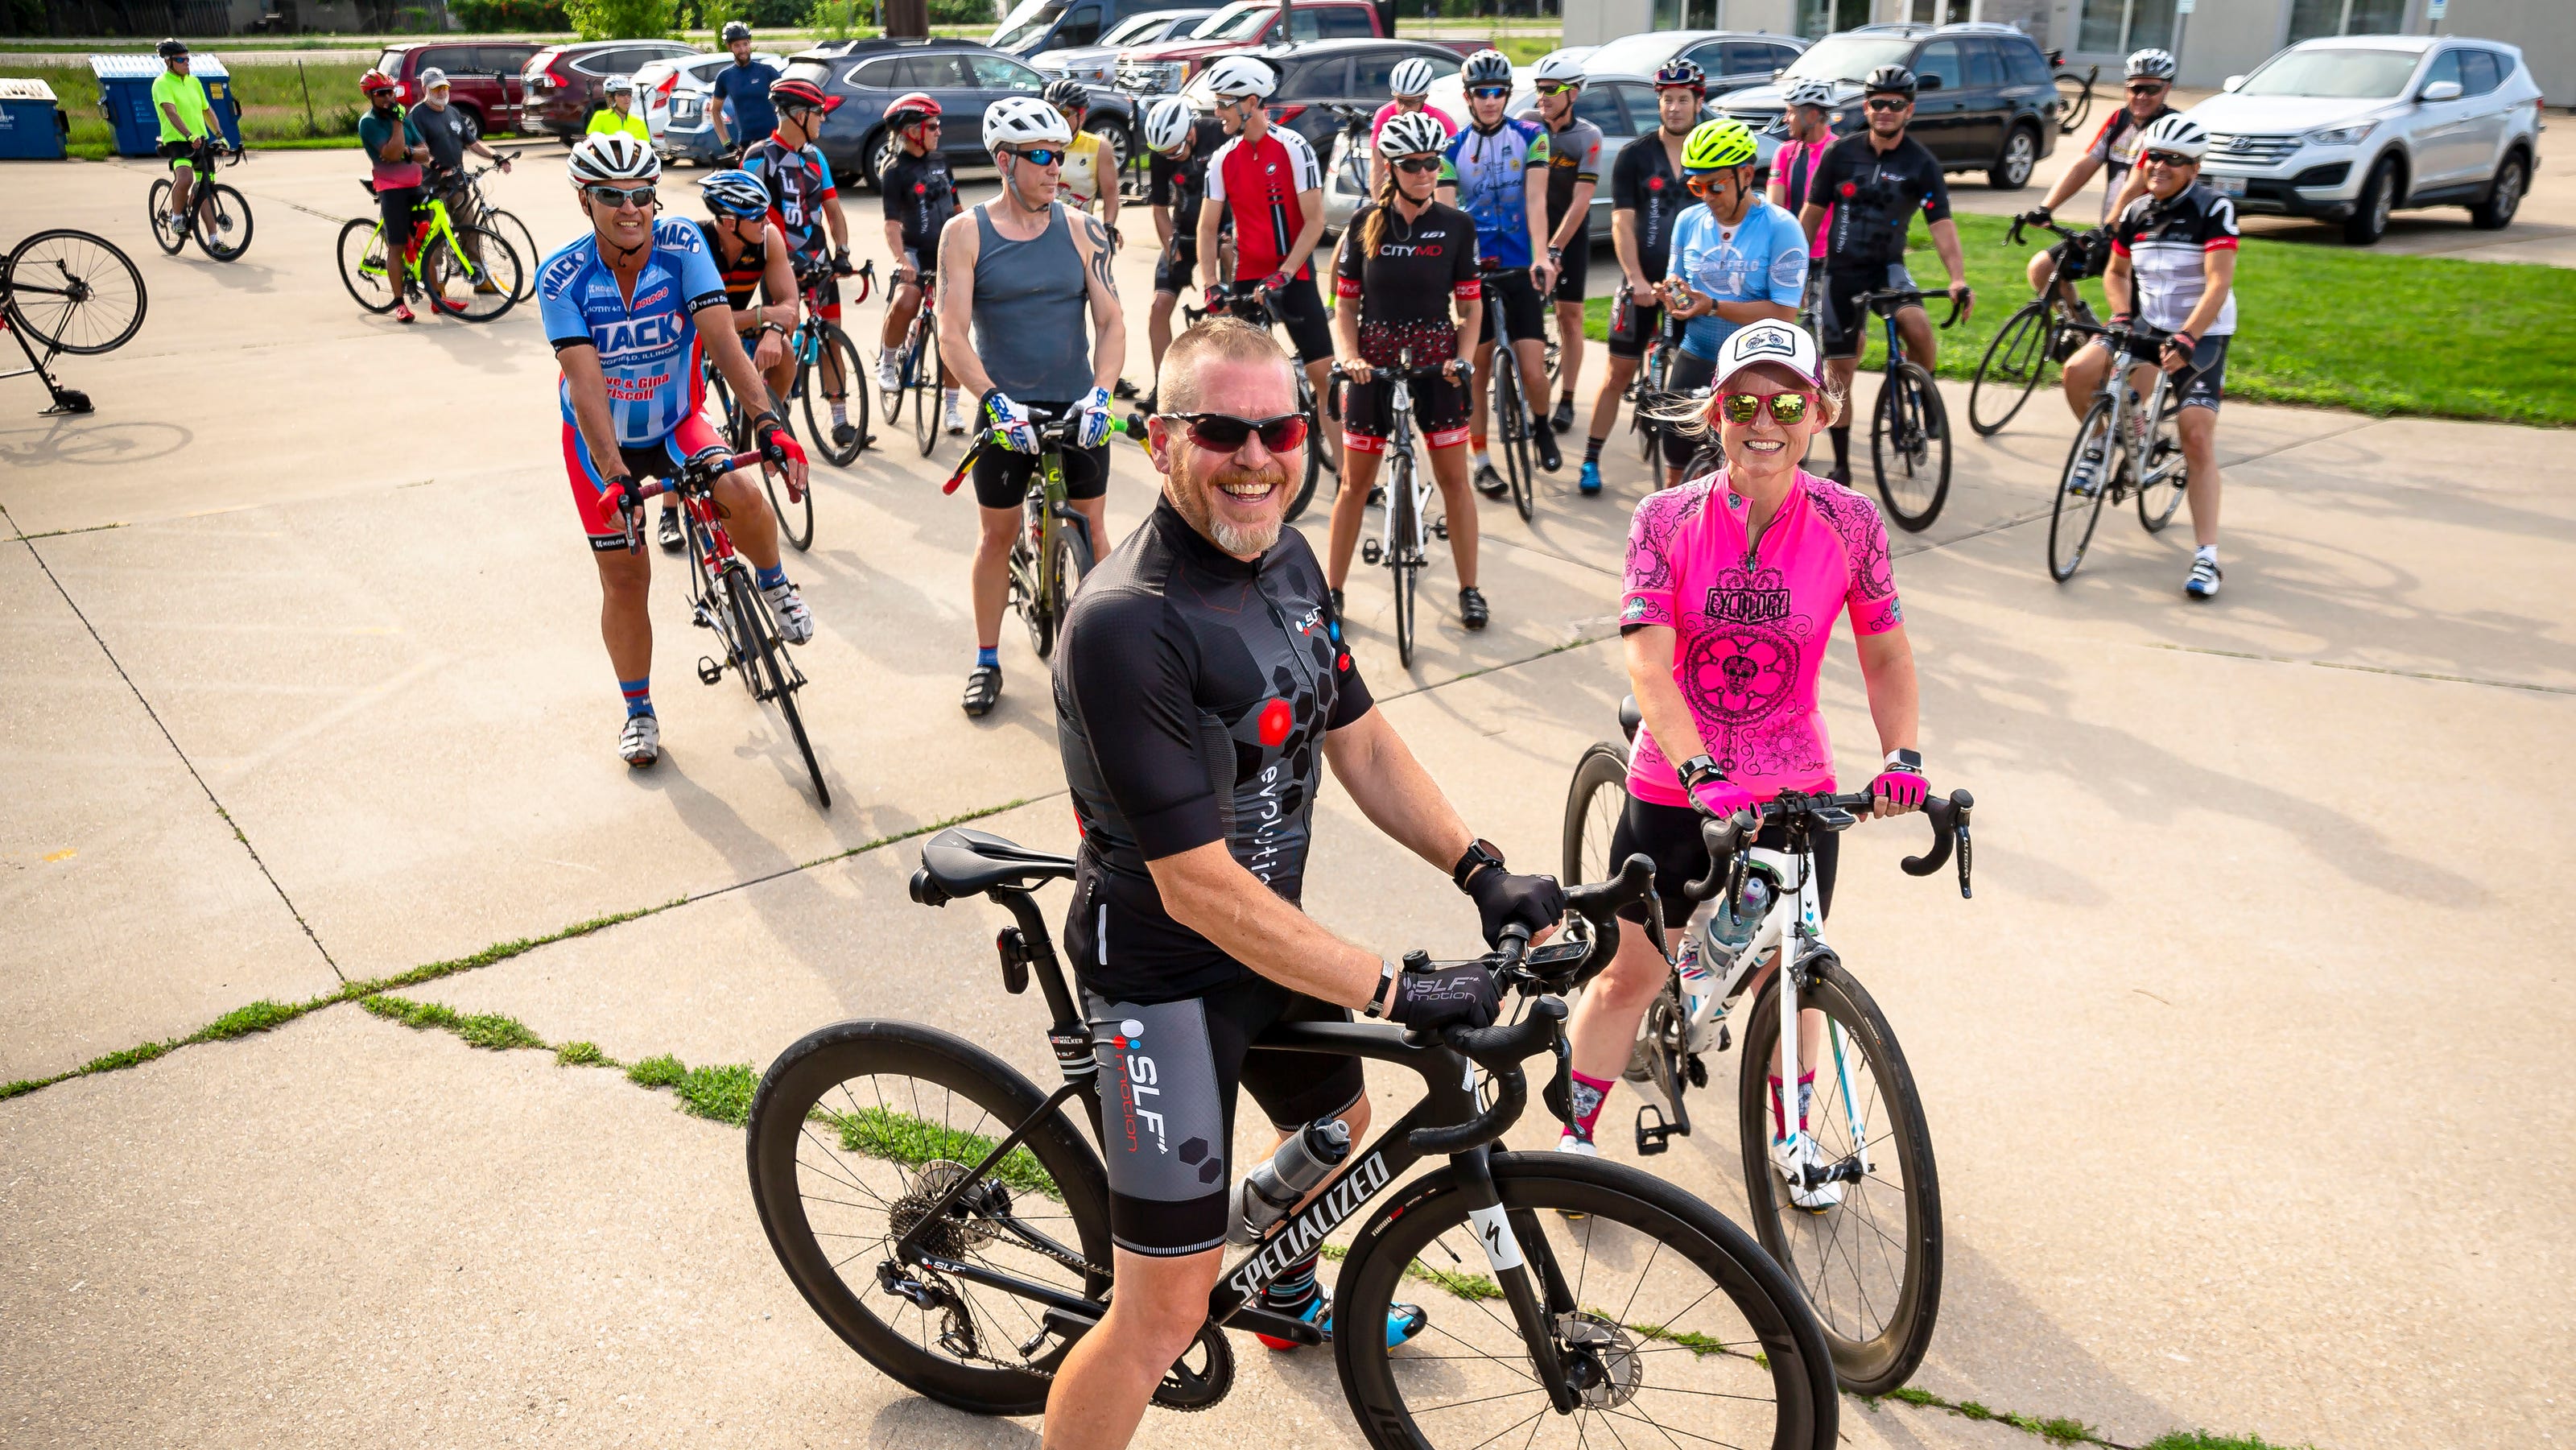 After s year's absence, Tour de Donut returns to Staunton, Illinois